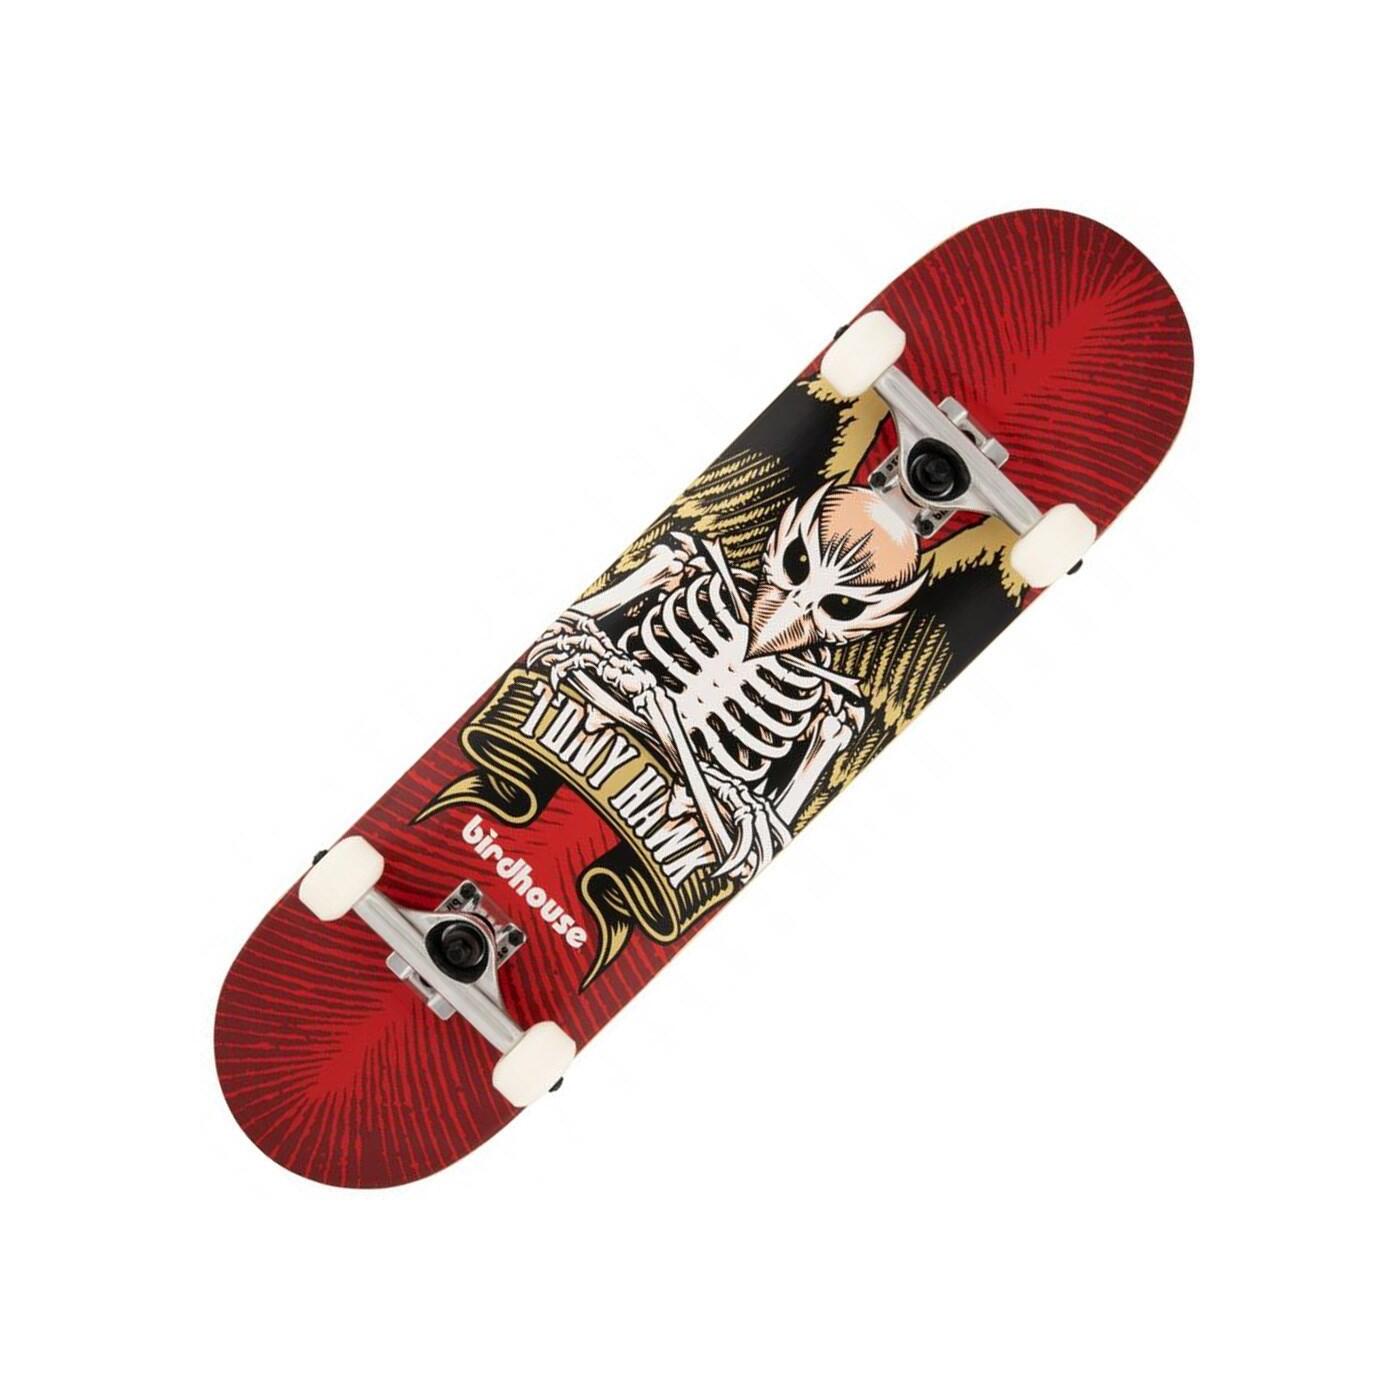 BIRDHOUSE Stage 1 TH Icon 8inch Complete Skateboard